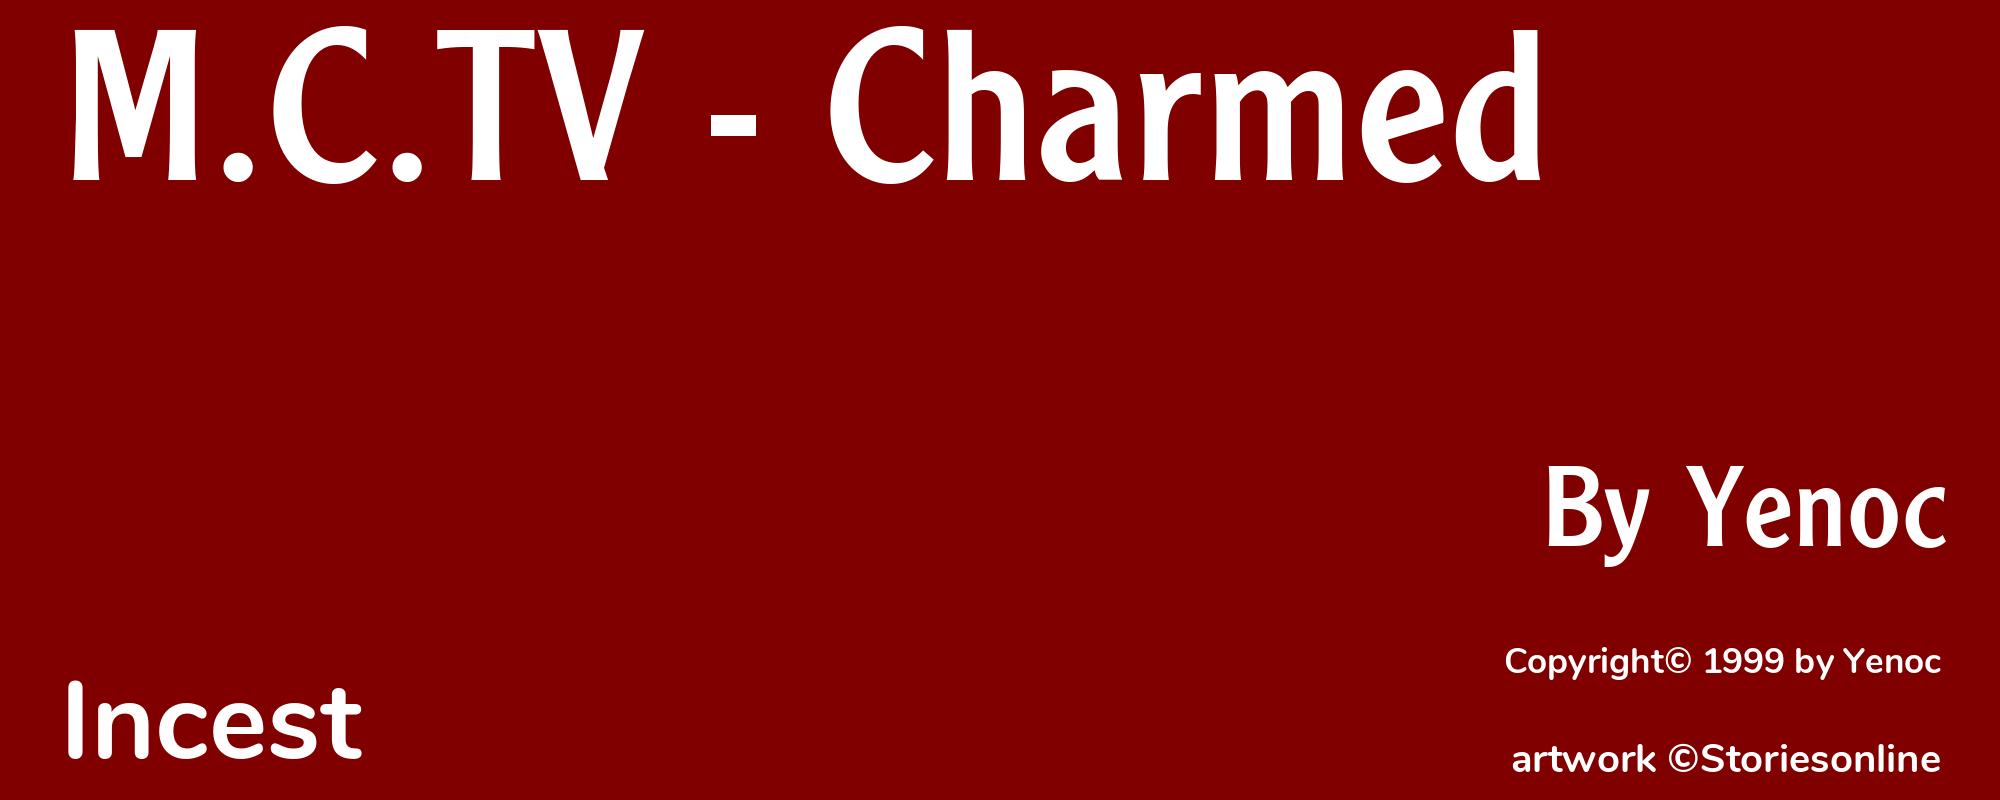 M.C.TV - Charmed - Cover